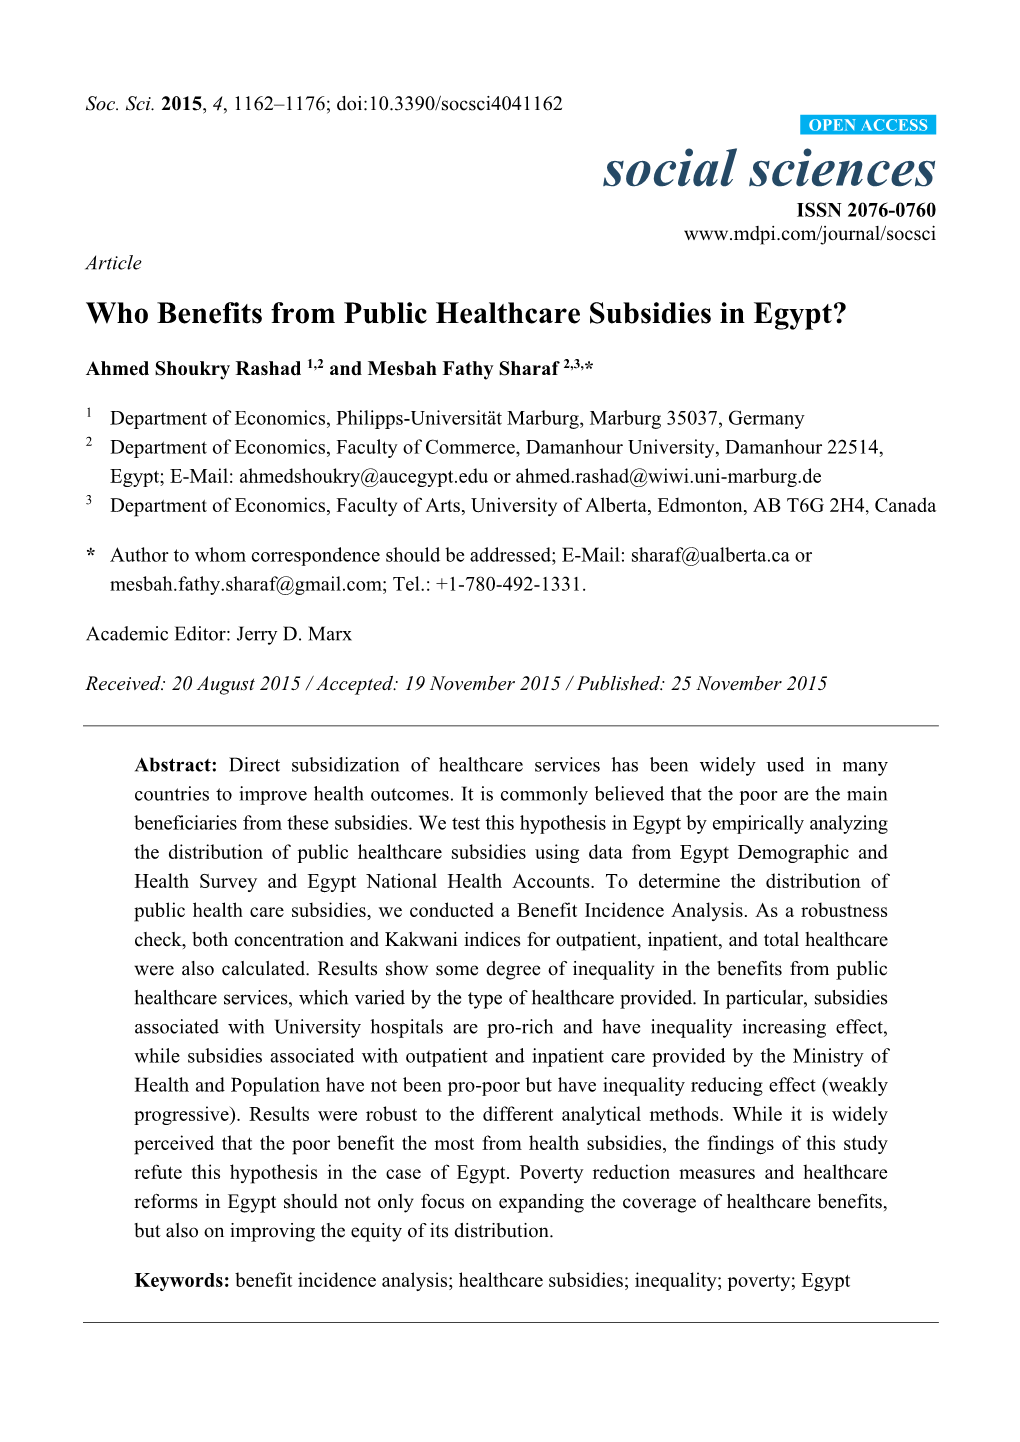 Who Benefits from Public Healthcare Subsidies in Egypt?